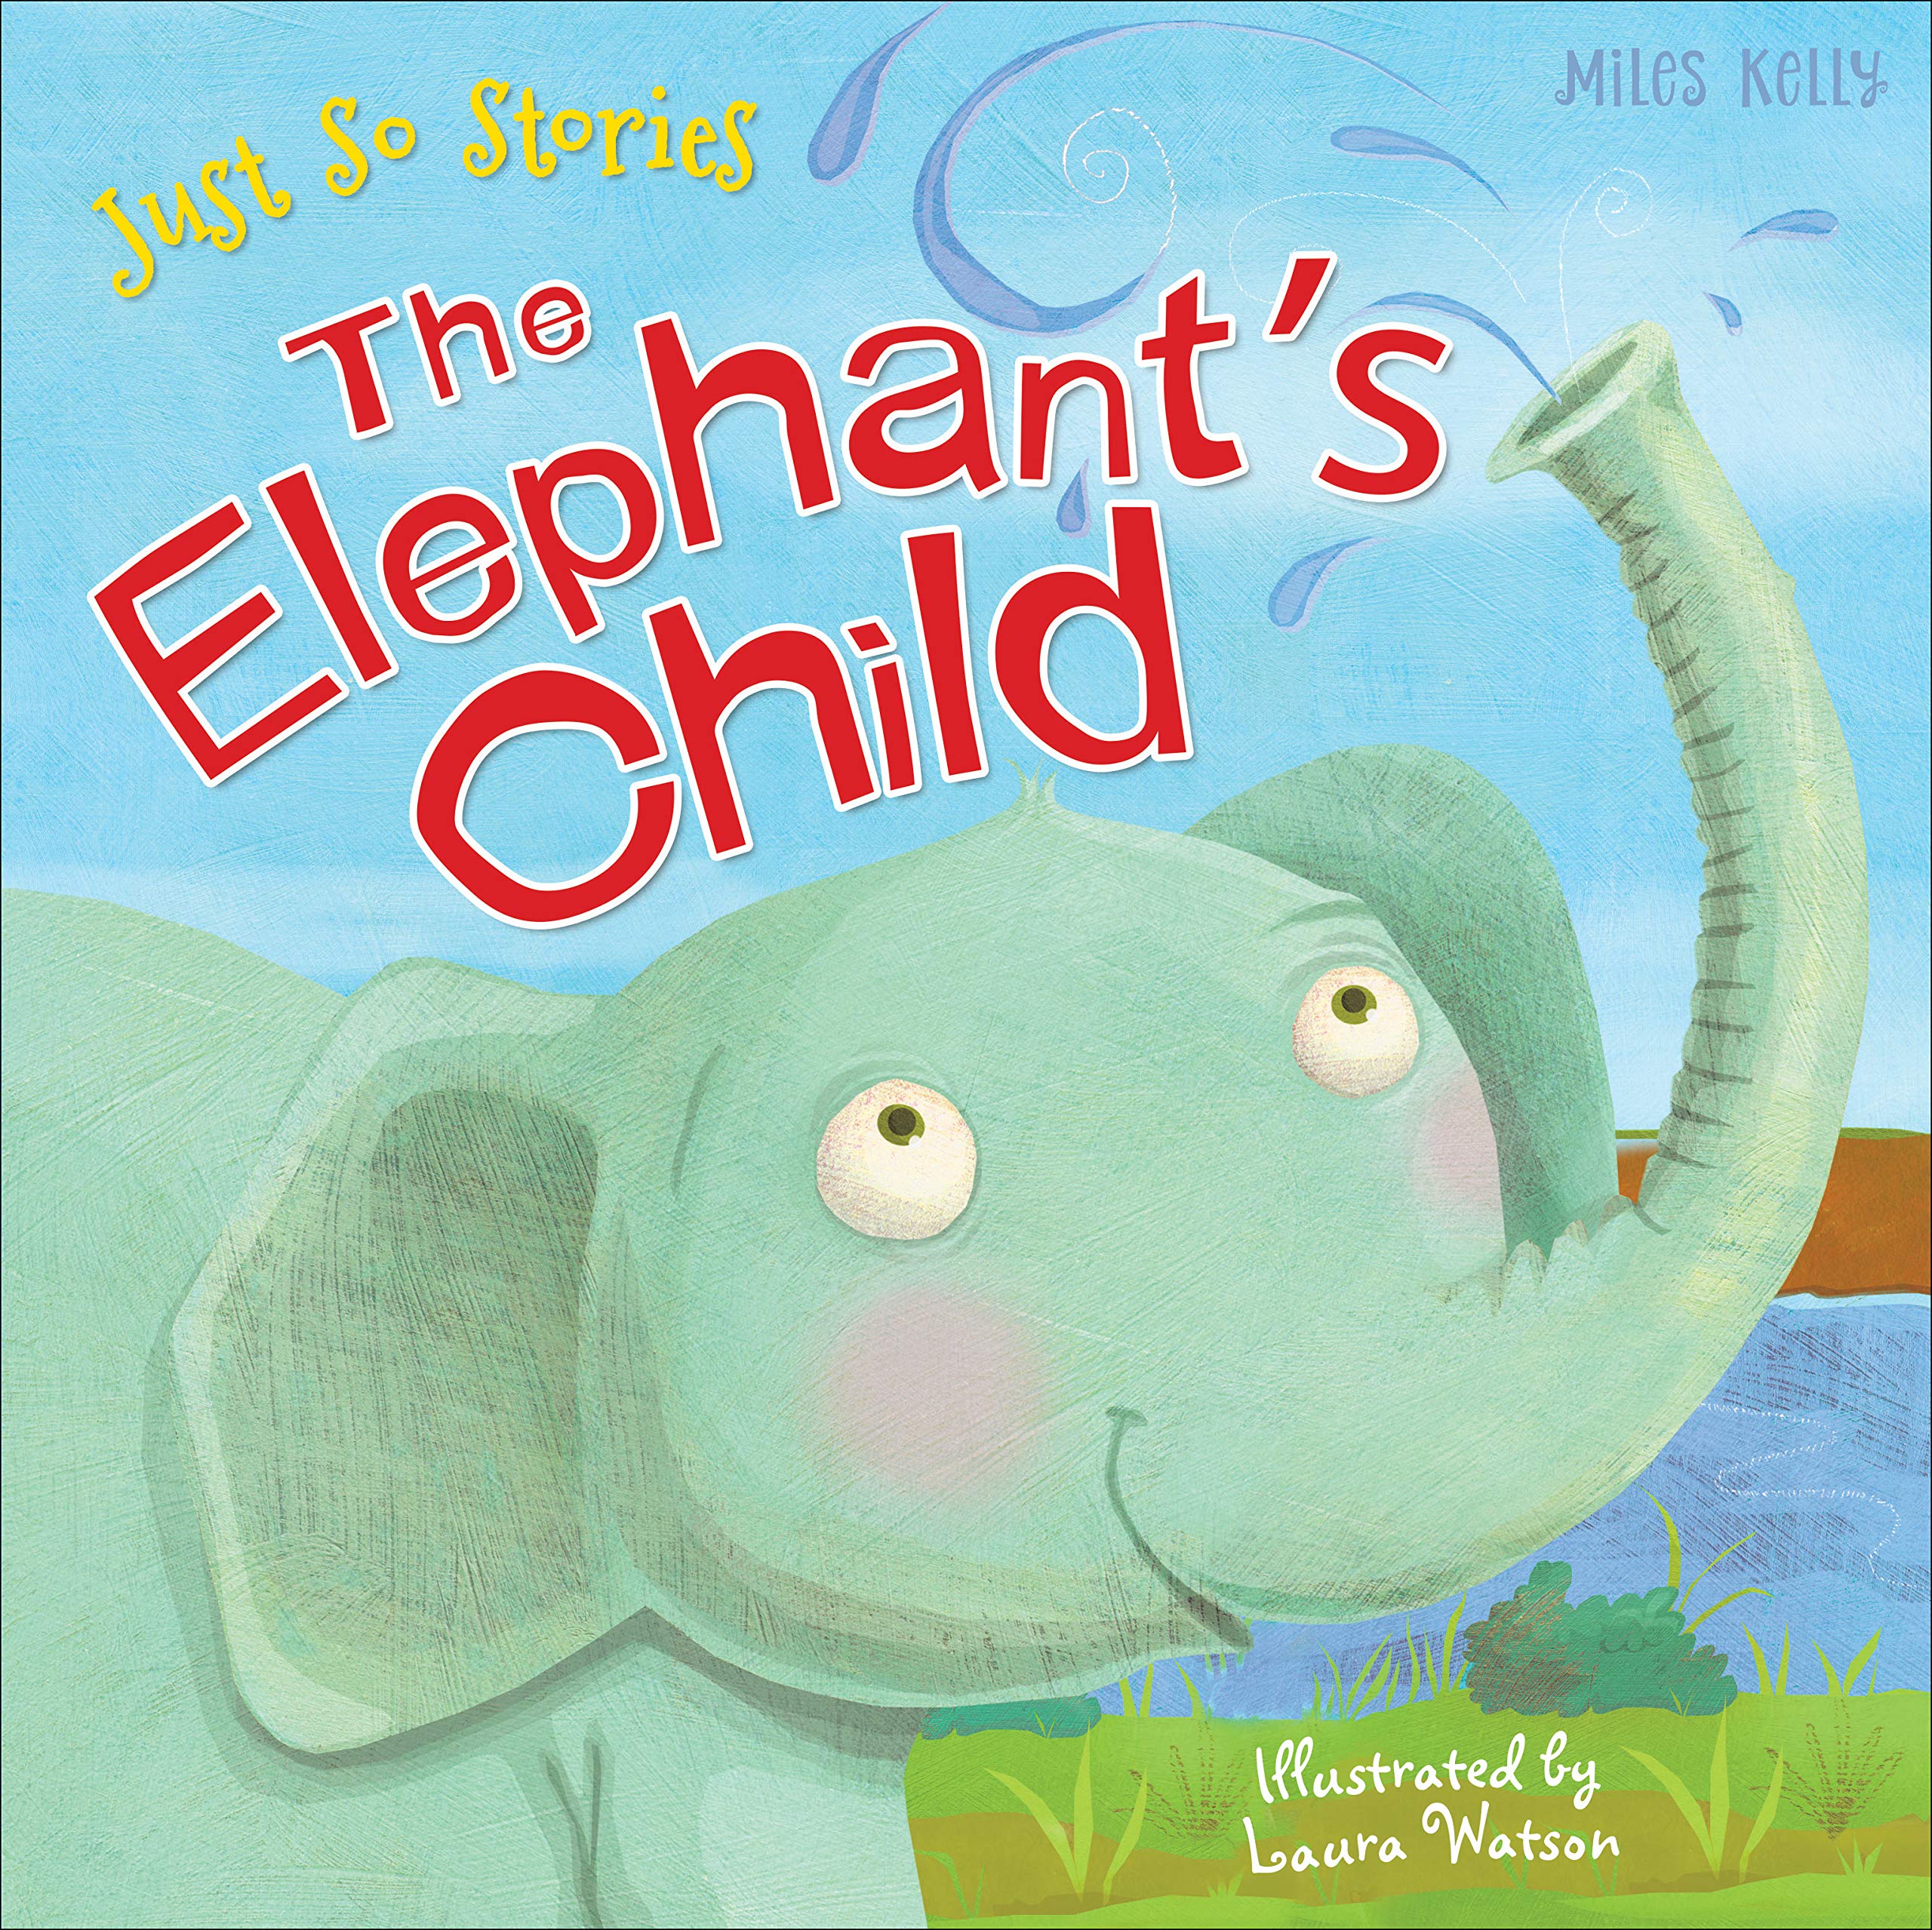 Just So Stories: The Elephant's Child